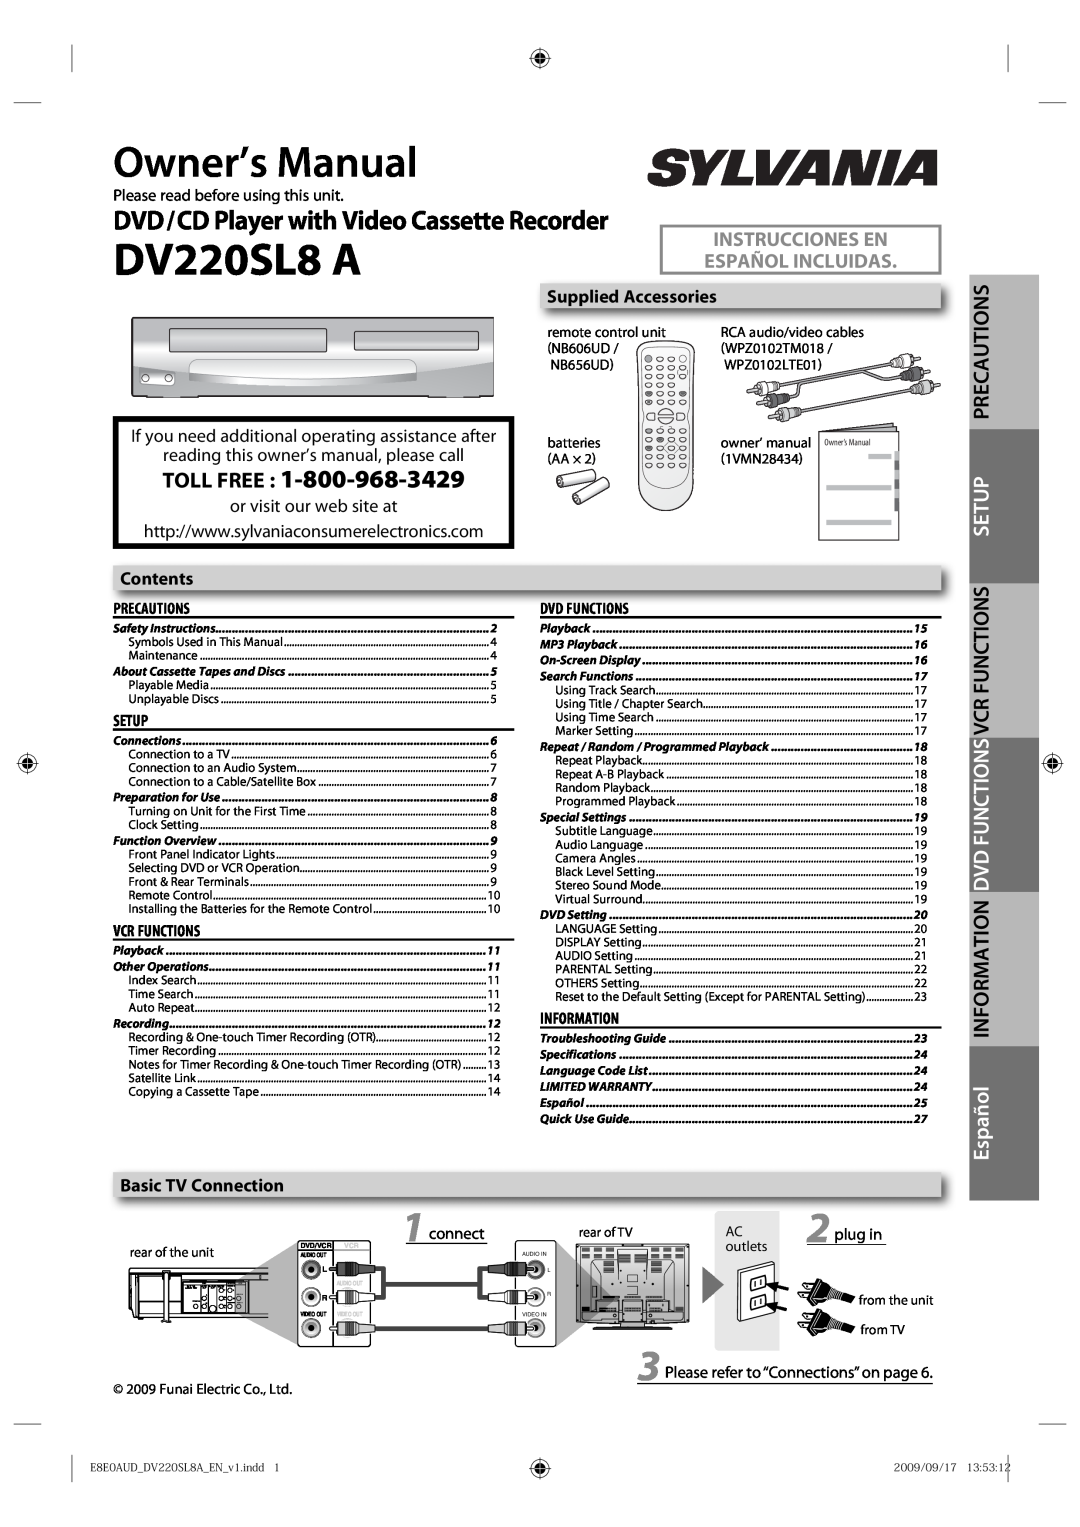 Sylvania DV220SL8 A owner manual Owner’s Manual, DVD/CD Player with Video Cassette Recorder, Supplied Accessories, Setup 